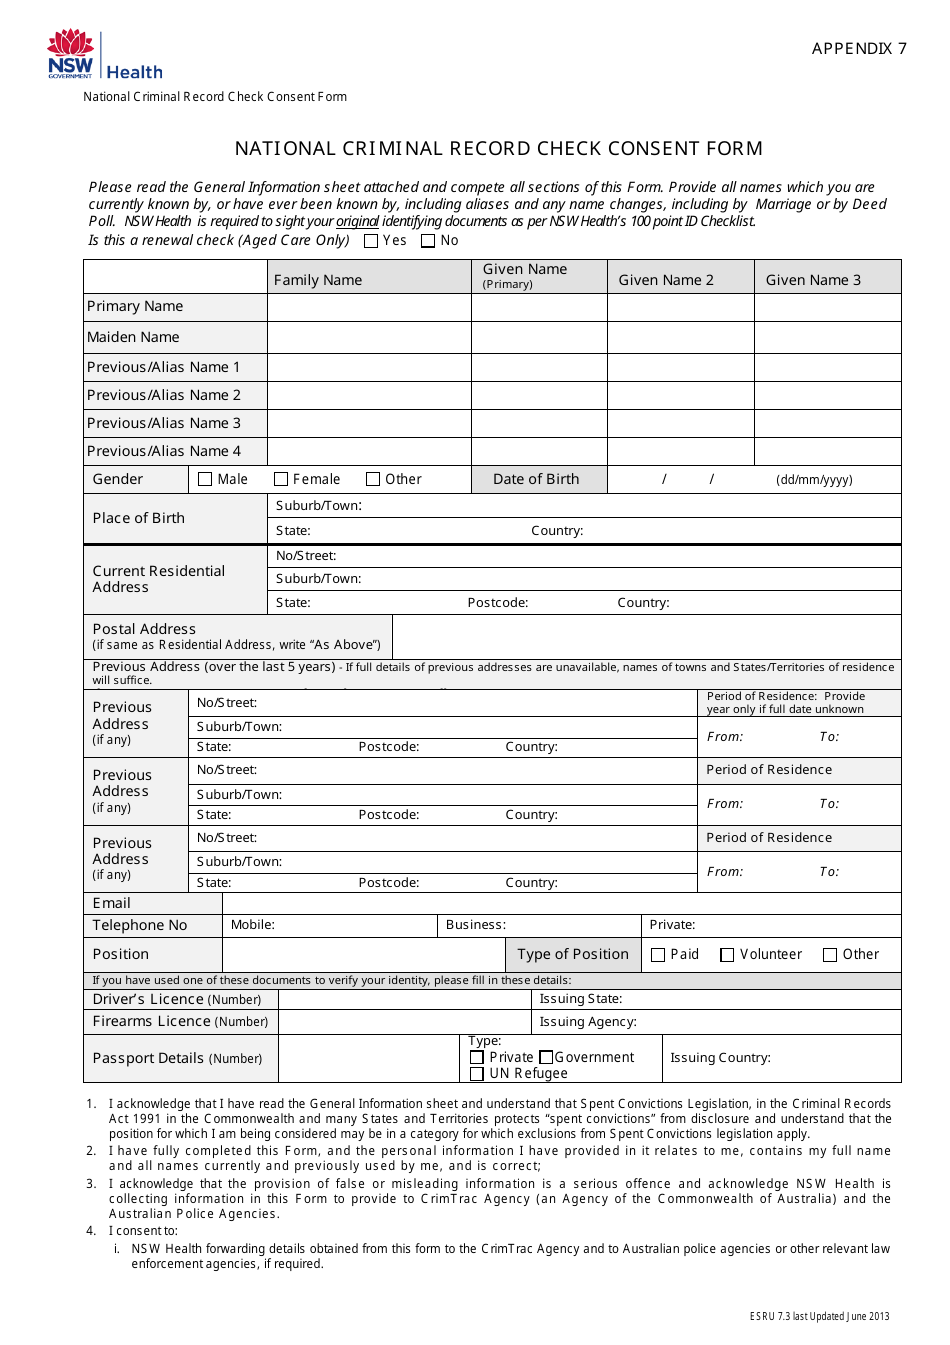 Appendix 7 National Criminal Record Check Consent Form - New South Wales, Australia, Page 1